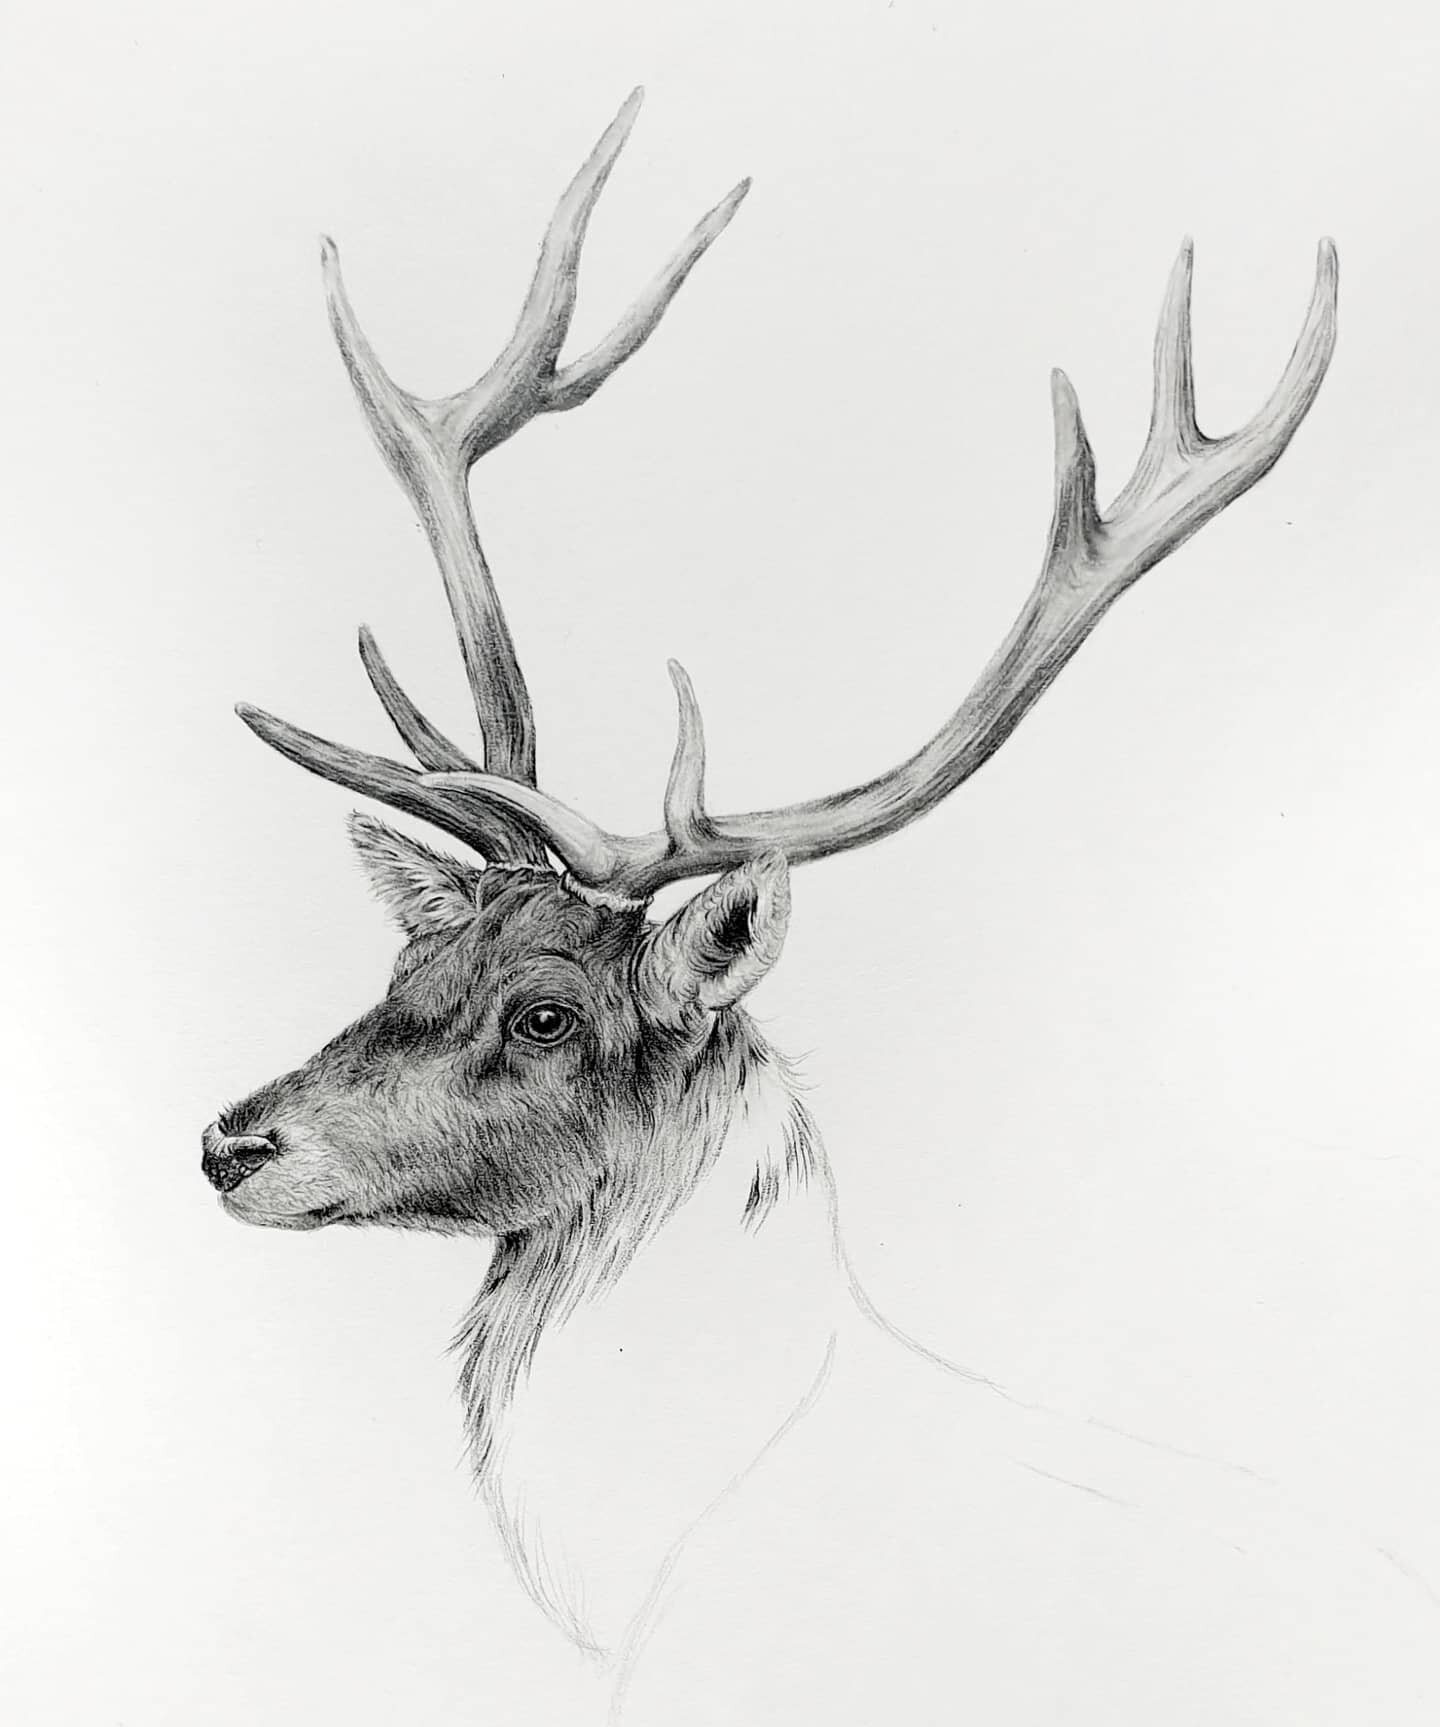 I'm not sure how I've gone all this time drawing mainly British wildlife, and there's not been a stag! It's definitely one of the most requested so here's the early stages...🦌

#stag #wip #natureillustration #britishwildlife #reddeer #sketch #wildli